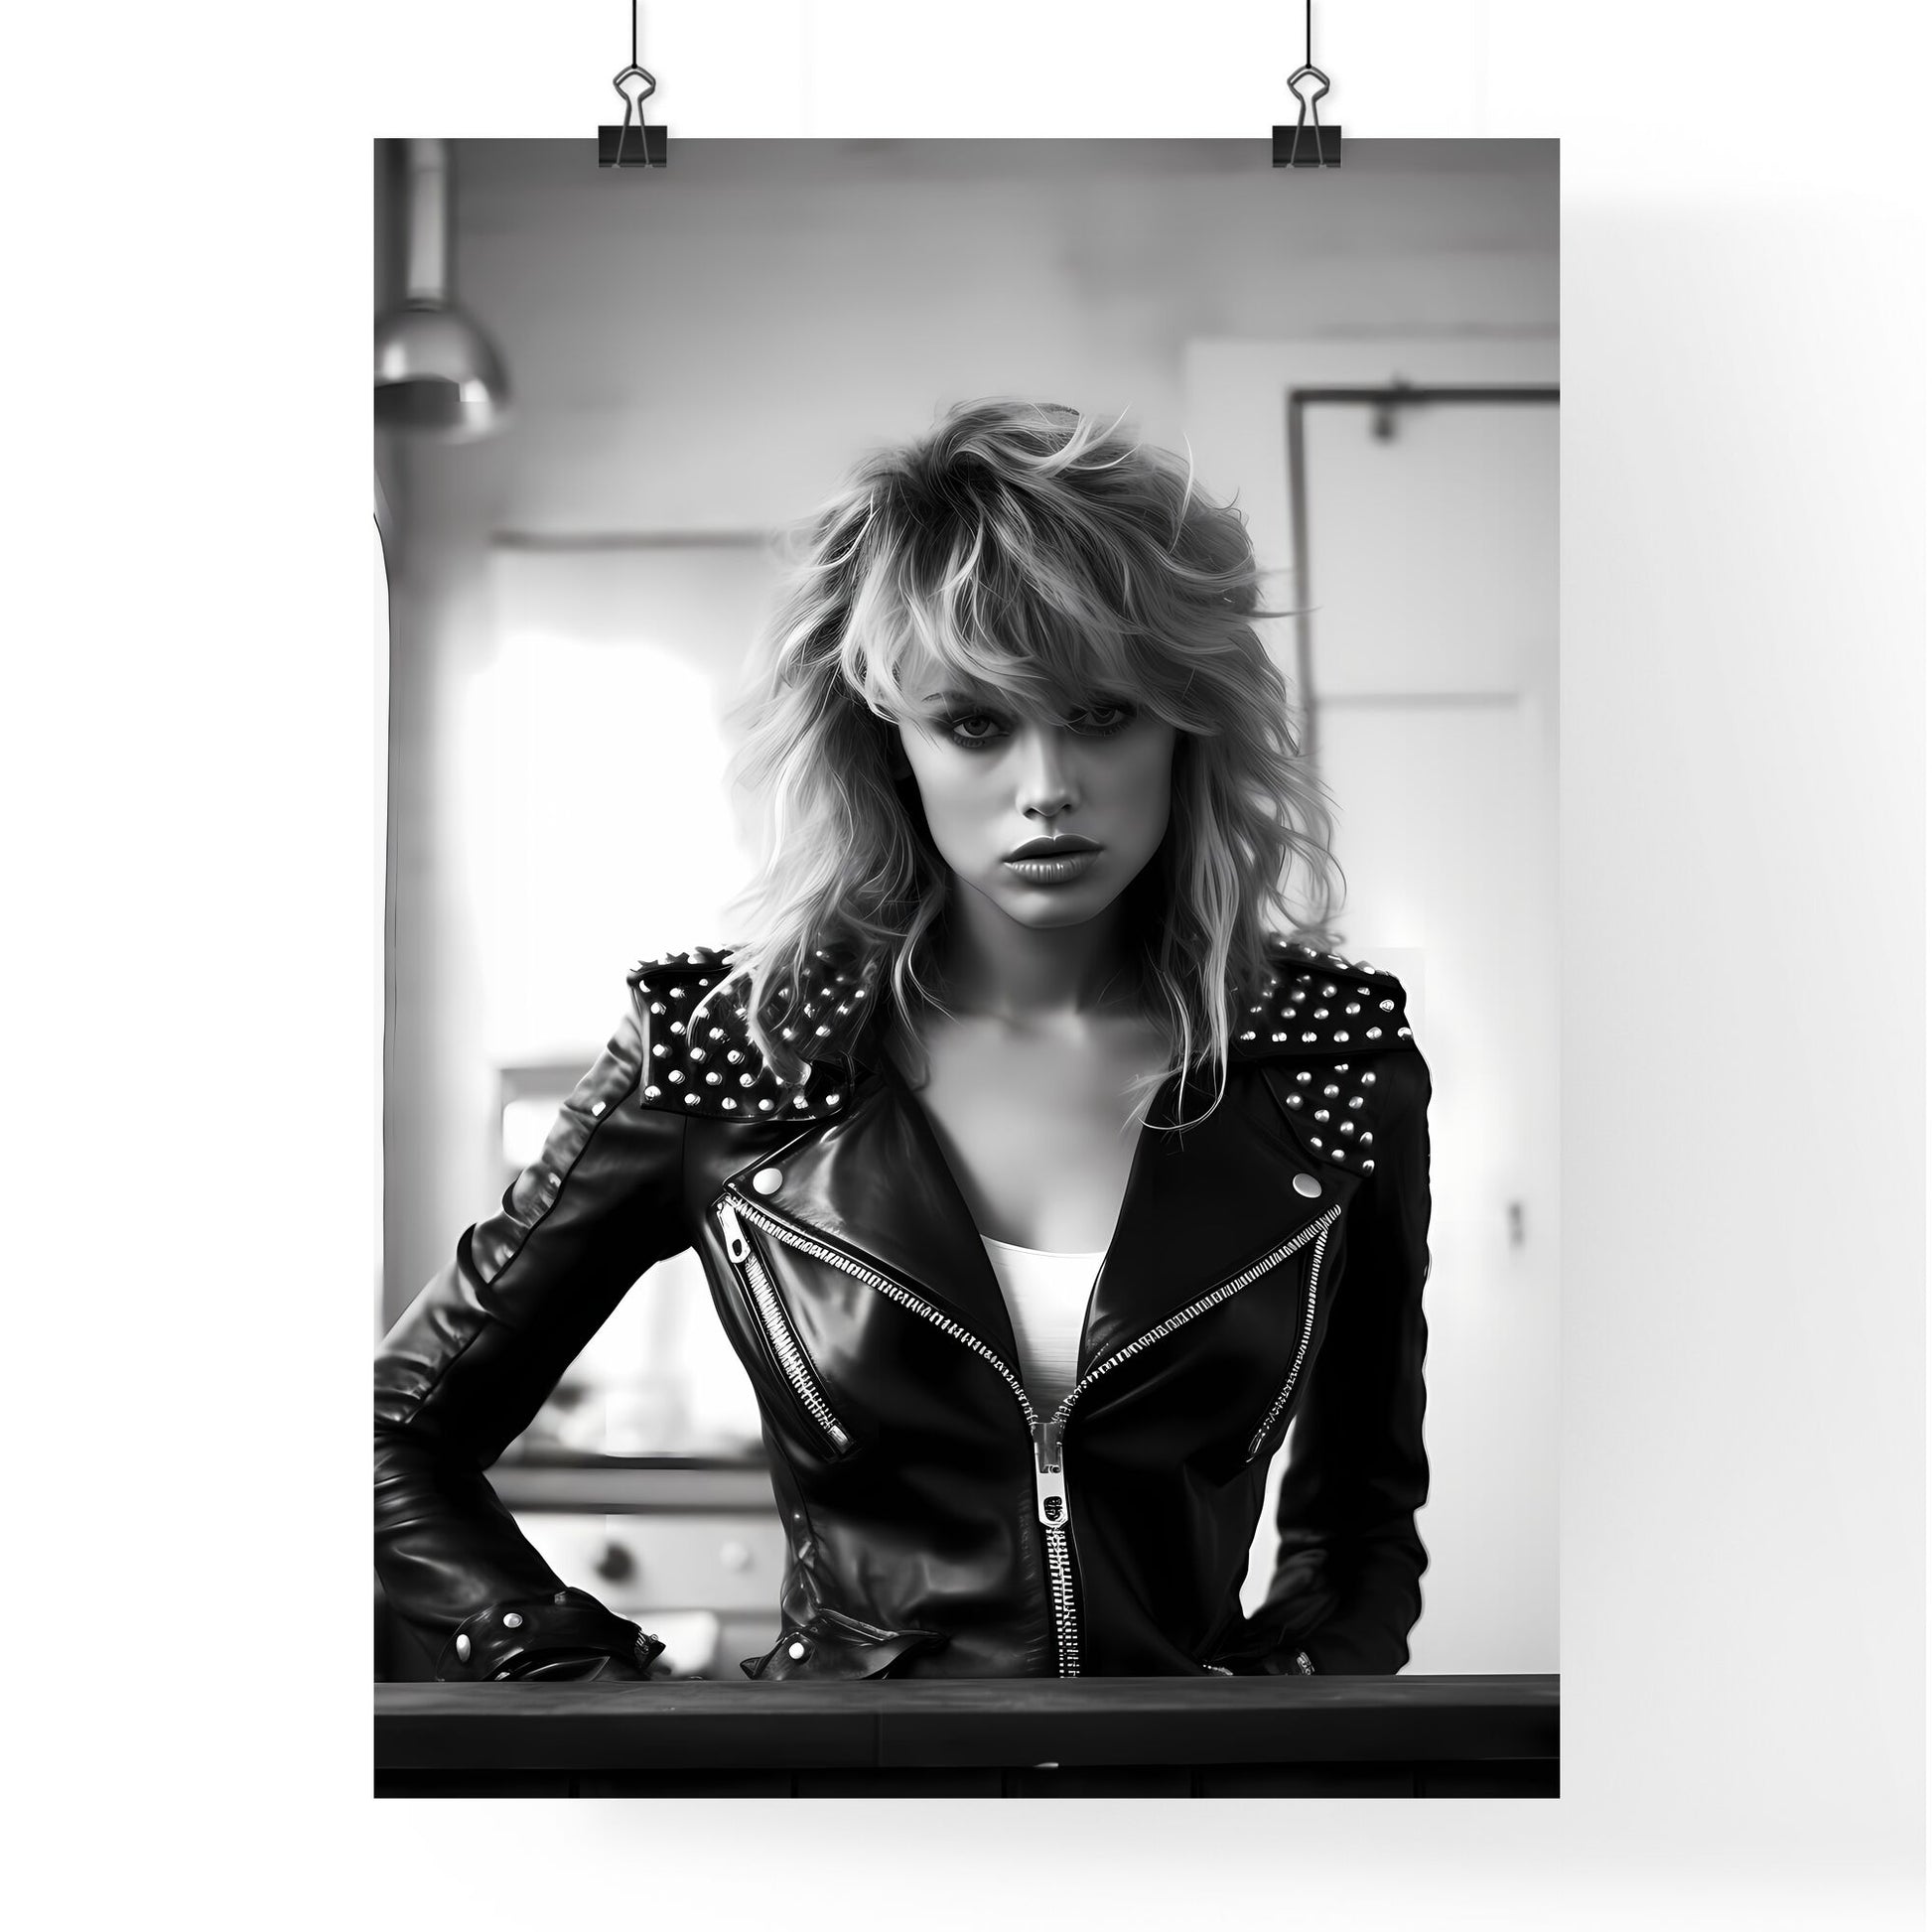 A Poster of leather goddess in a trendy kitchen - A Woman In A Leather Jacket Default Title